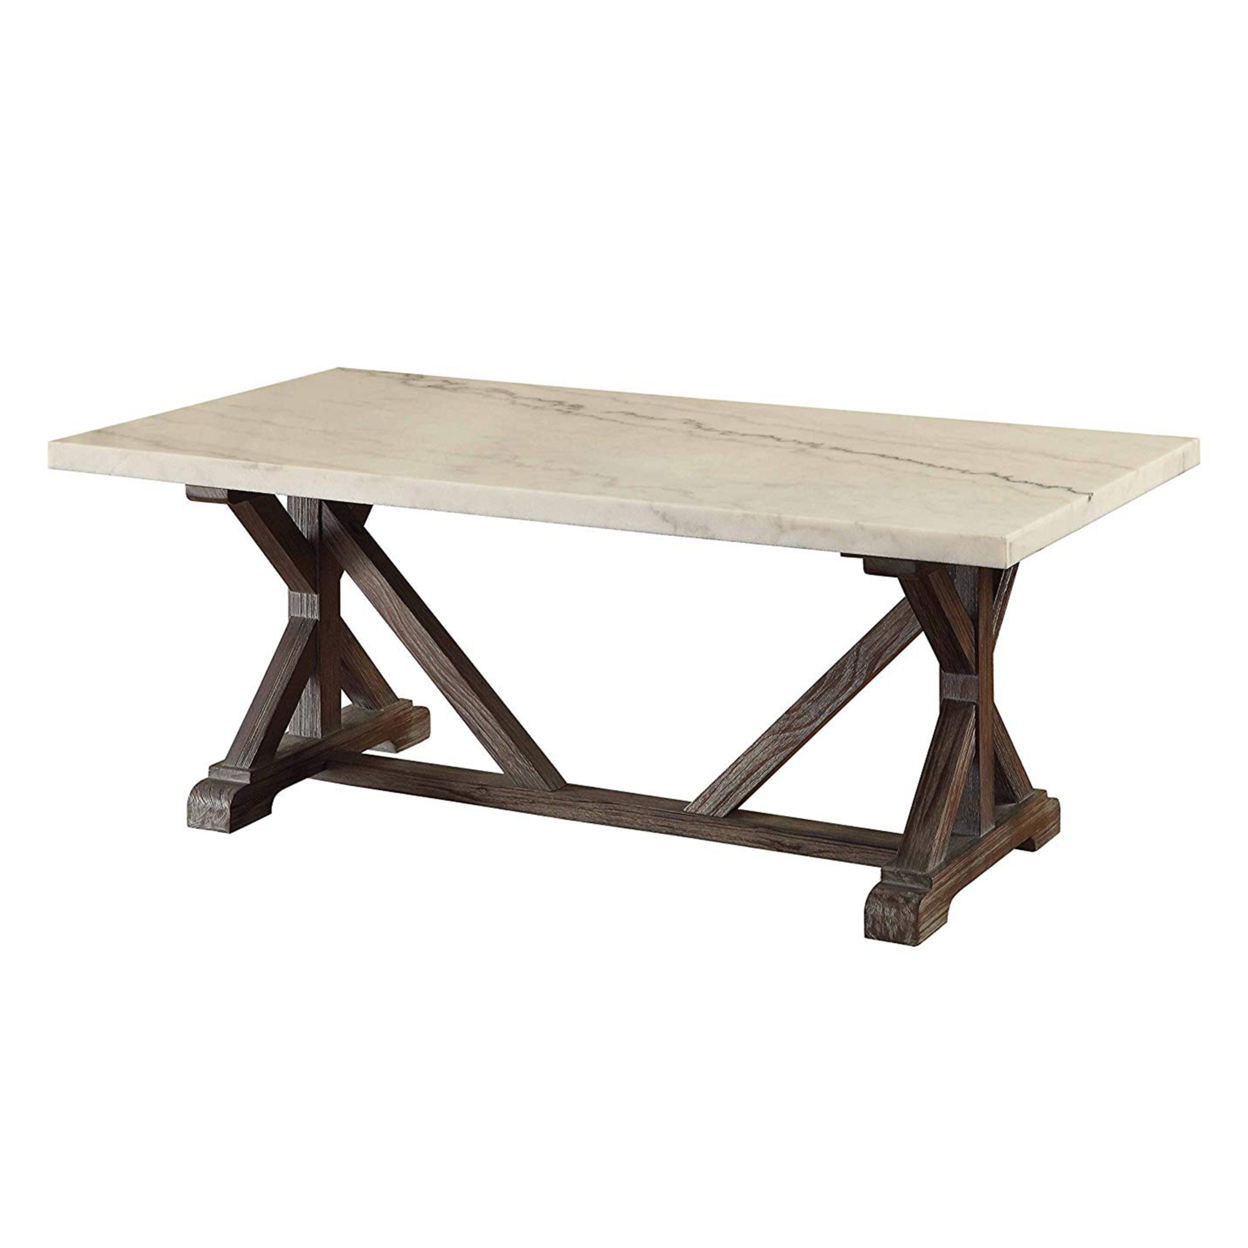 Marble Rectangle Shaped Coffee Table With Wooden Trestle Base, White And Espresso Brown- ACME